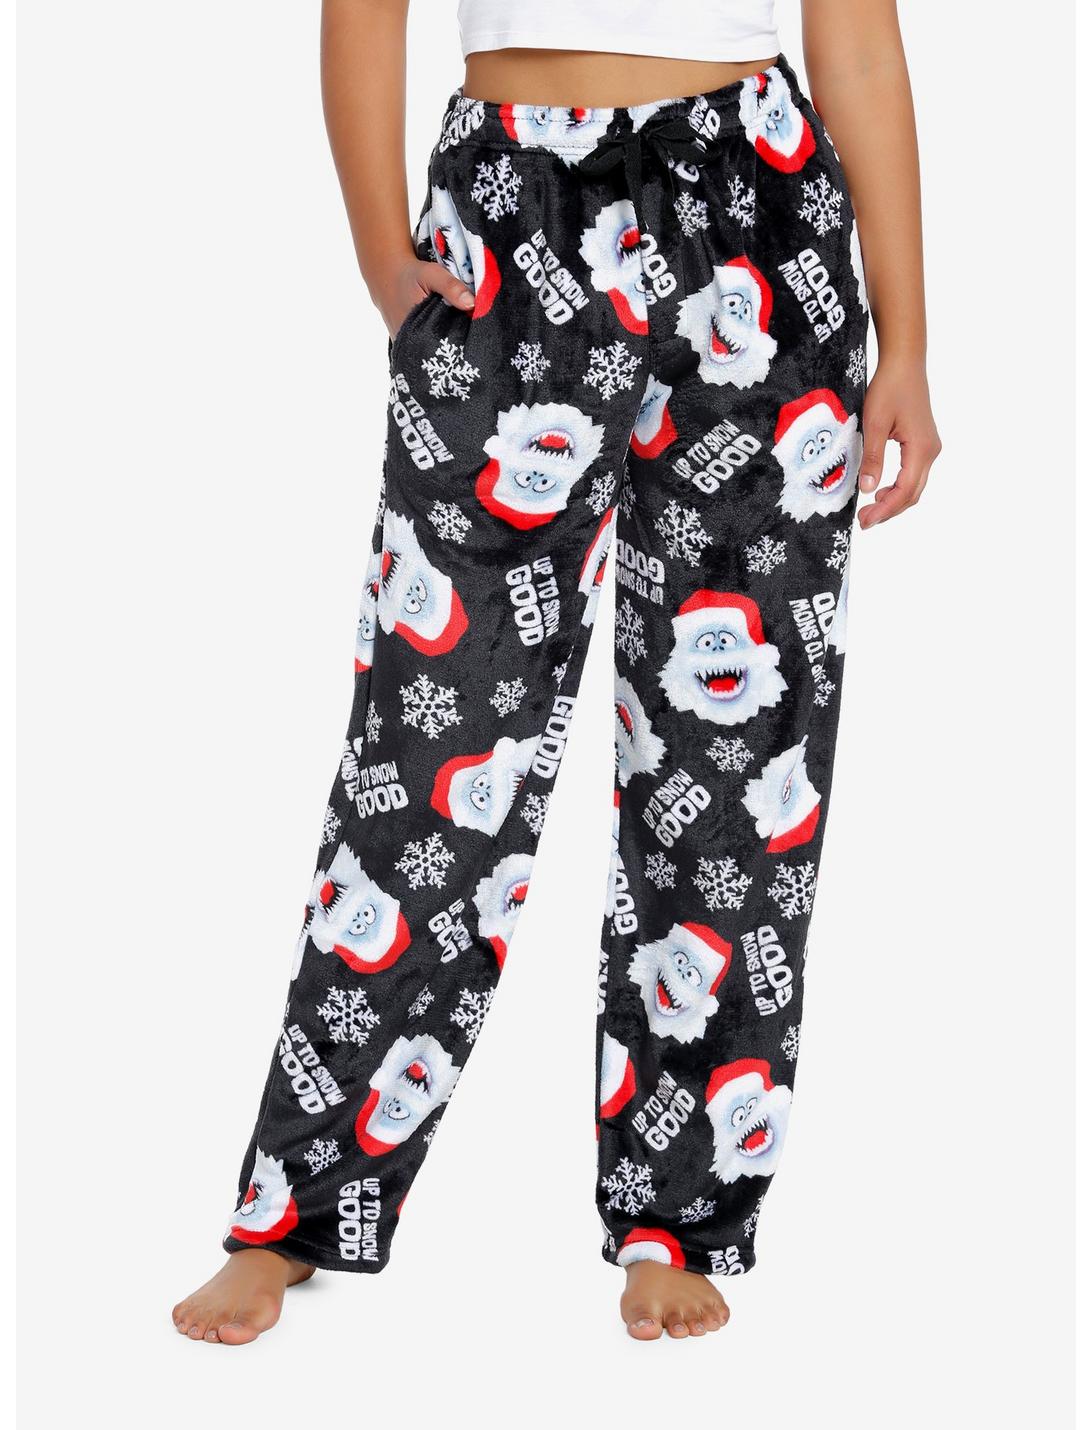 Rudolph The Red-Nosed Reindeer Bumble Plush Pajama Pants, BLUE, hi-res